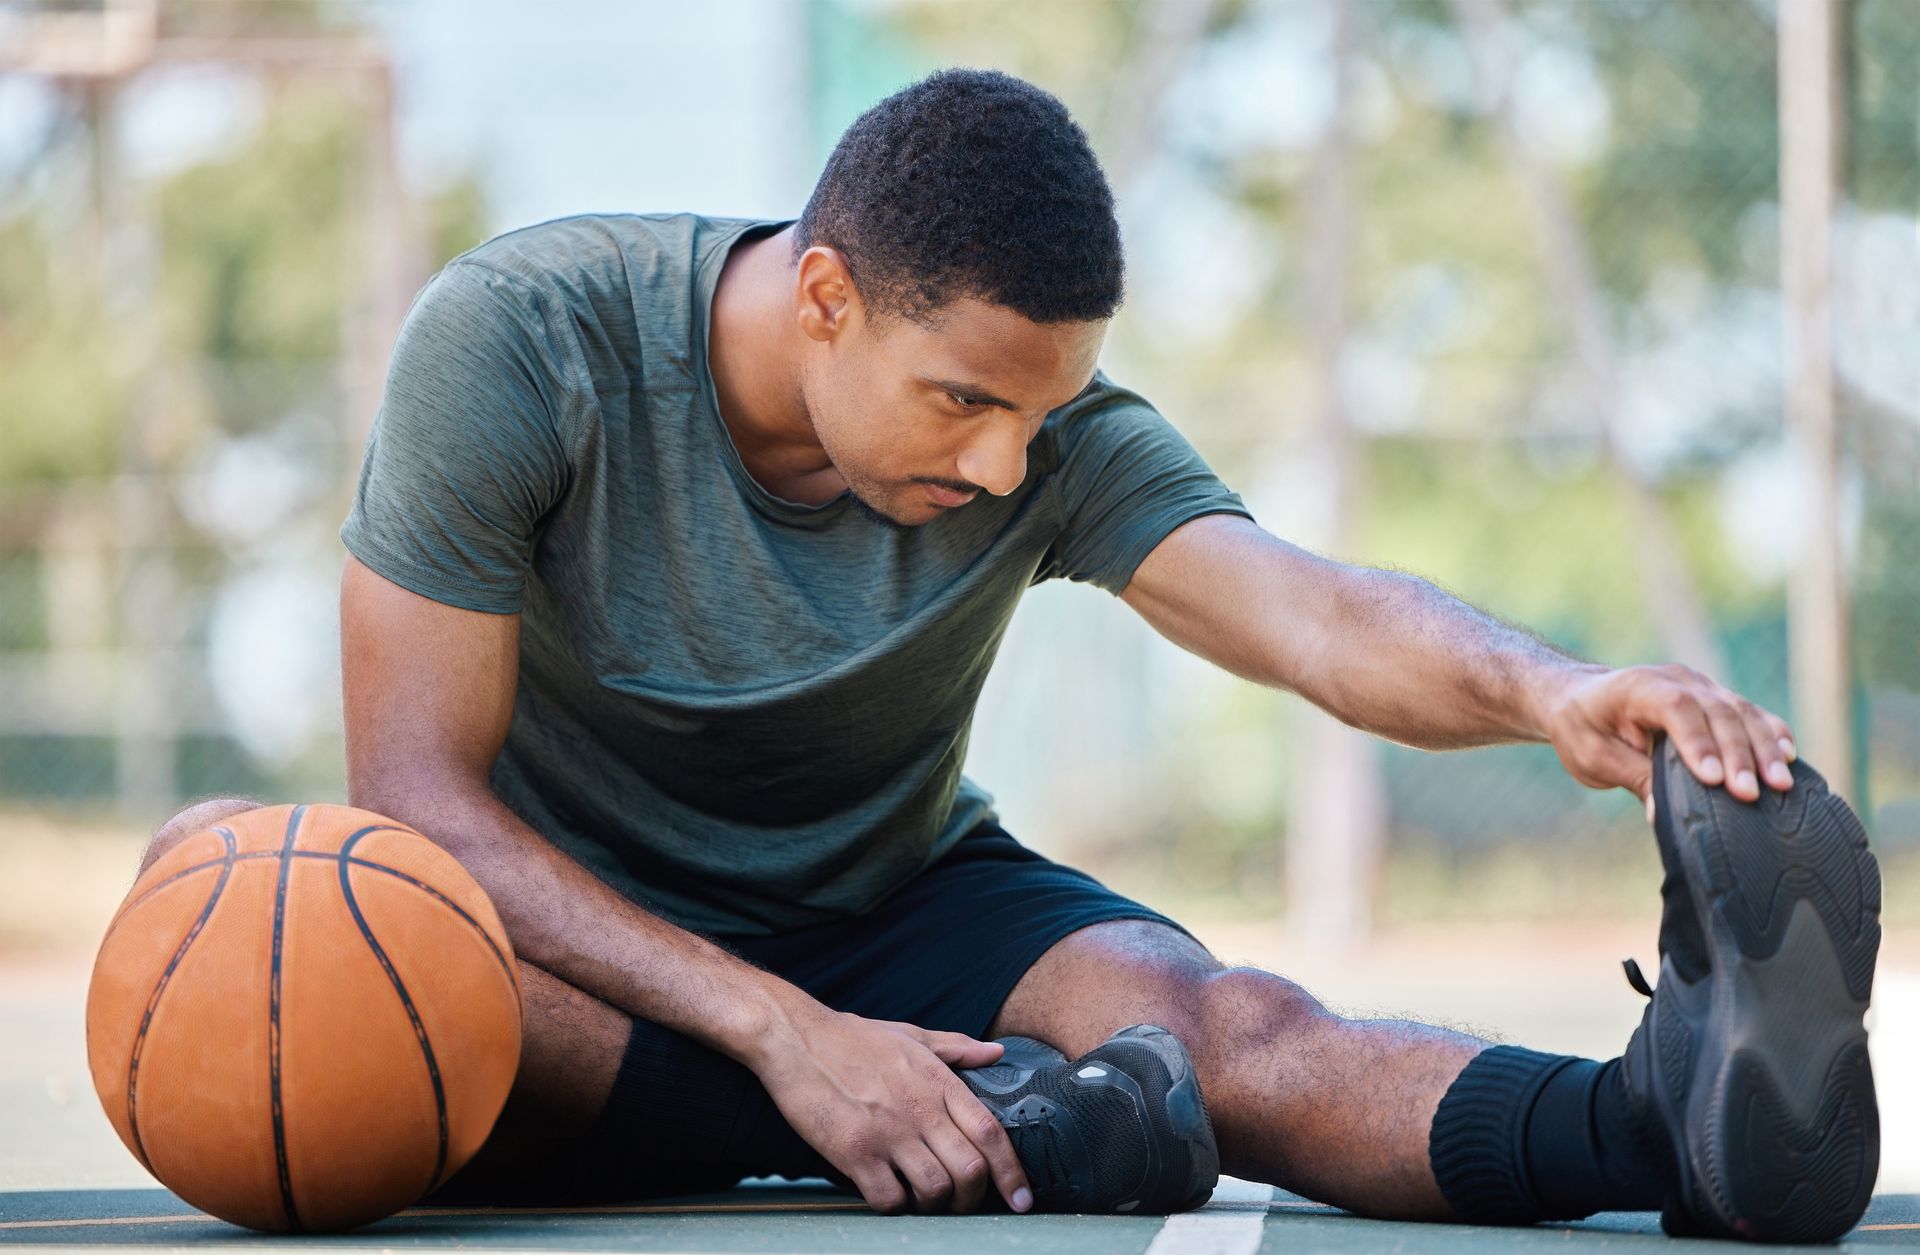 a man is sitting on the ground with a basketball and stretching his legs to prevent an ACL injury